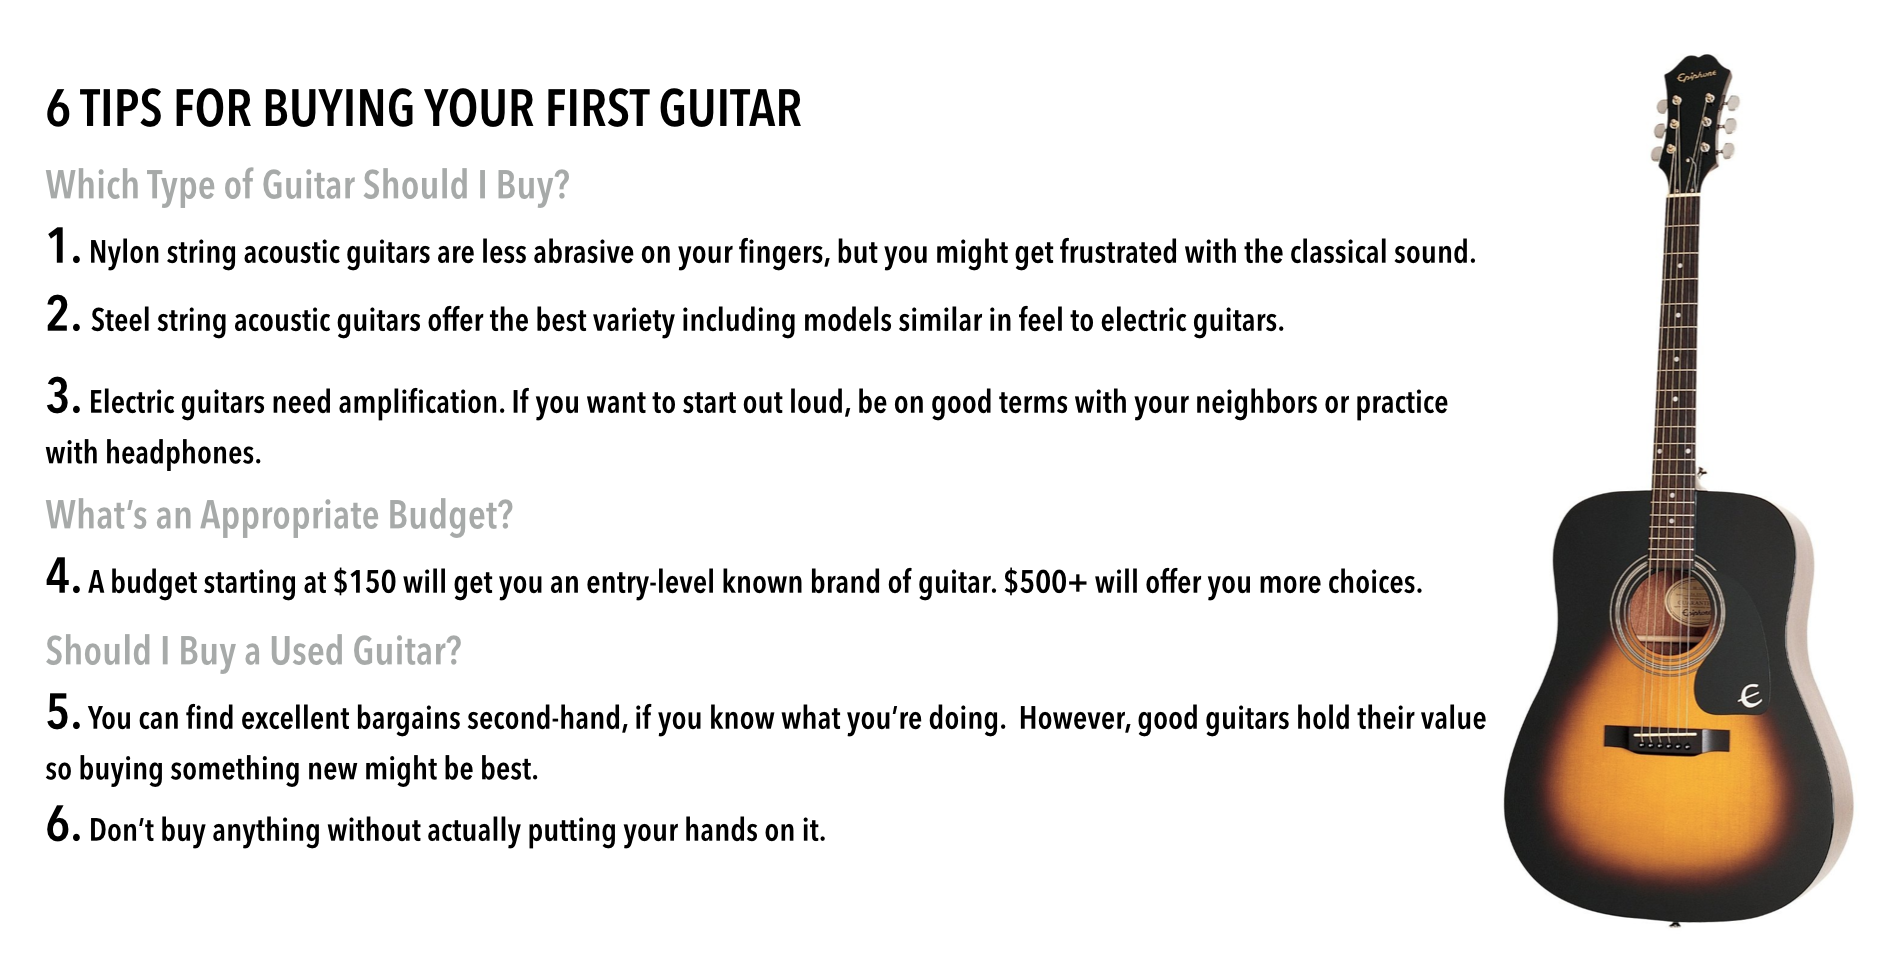 6 Tips For Buying Your First Guitar